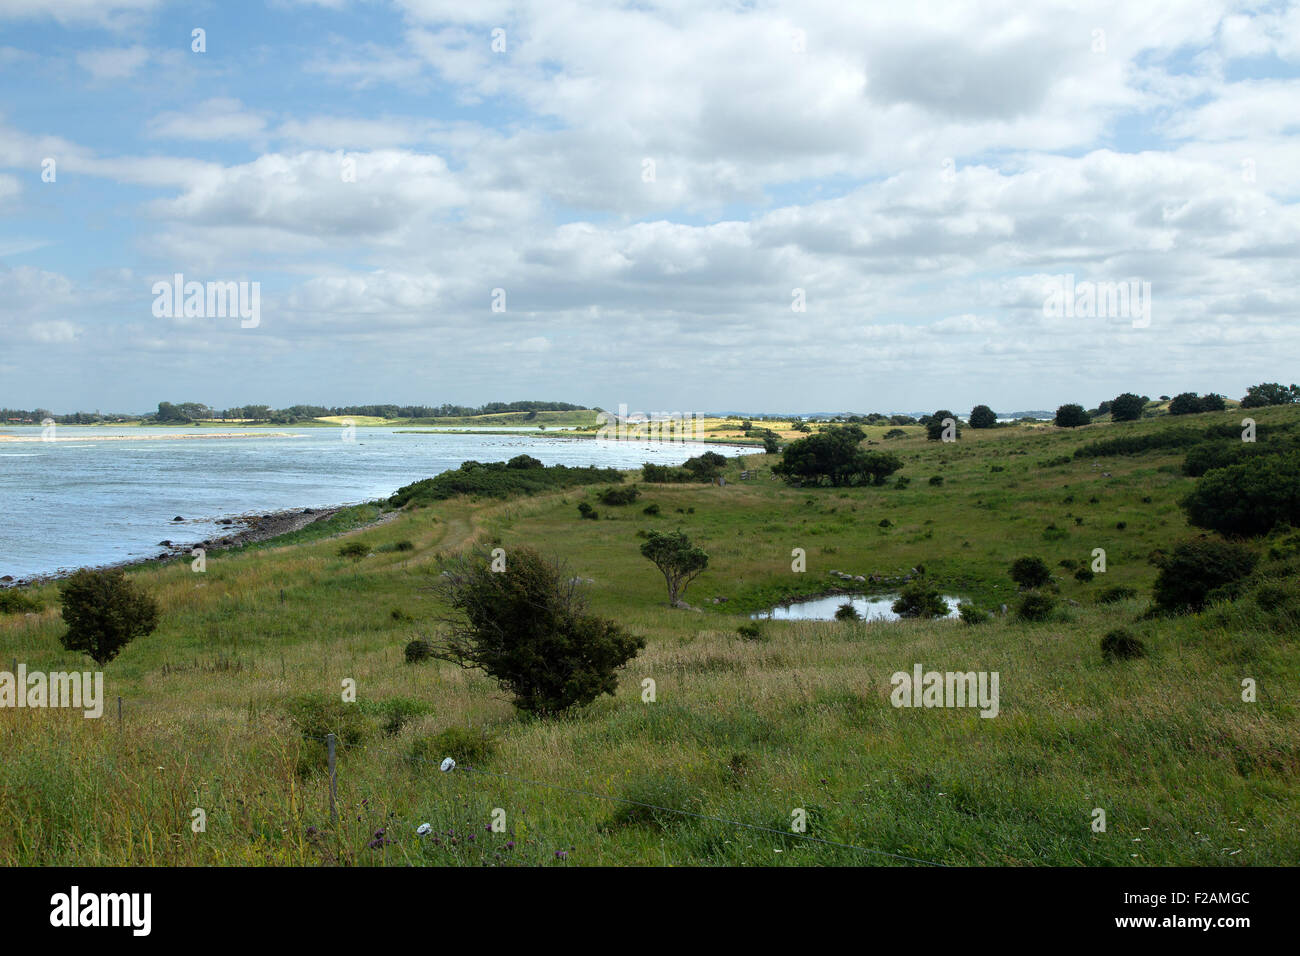 Danish Nature Reserve High Resolution Stock Photography and Images - Alamy